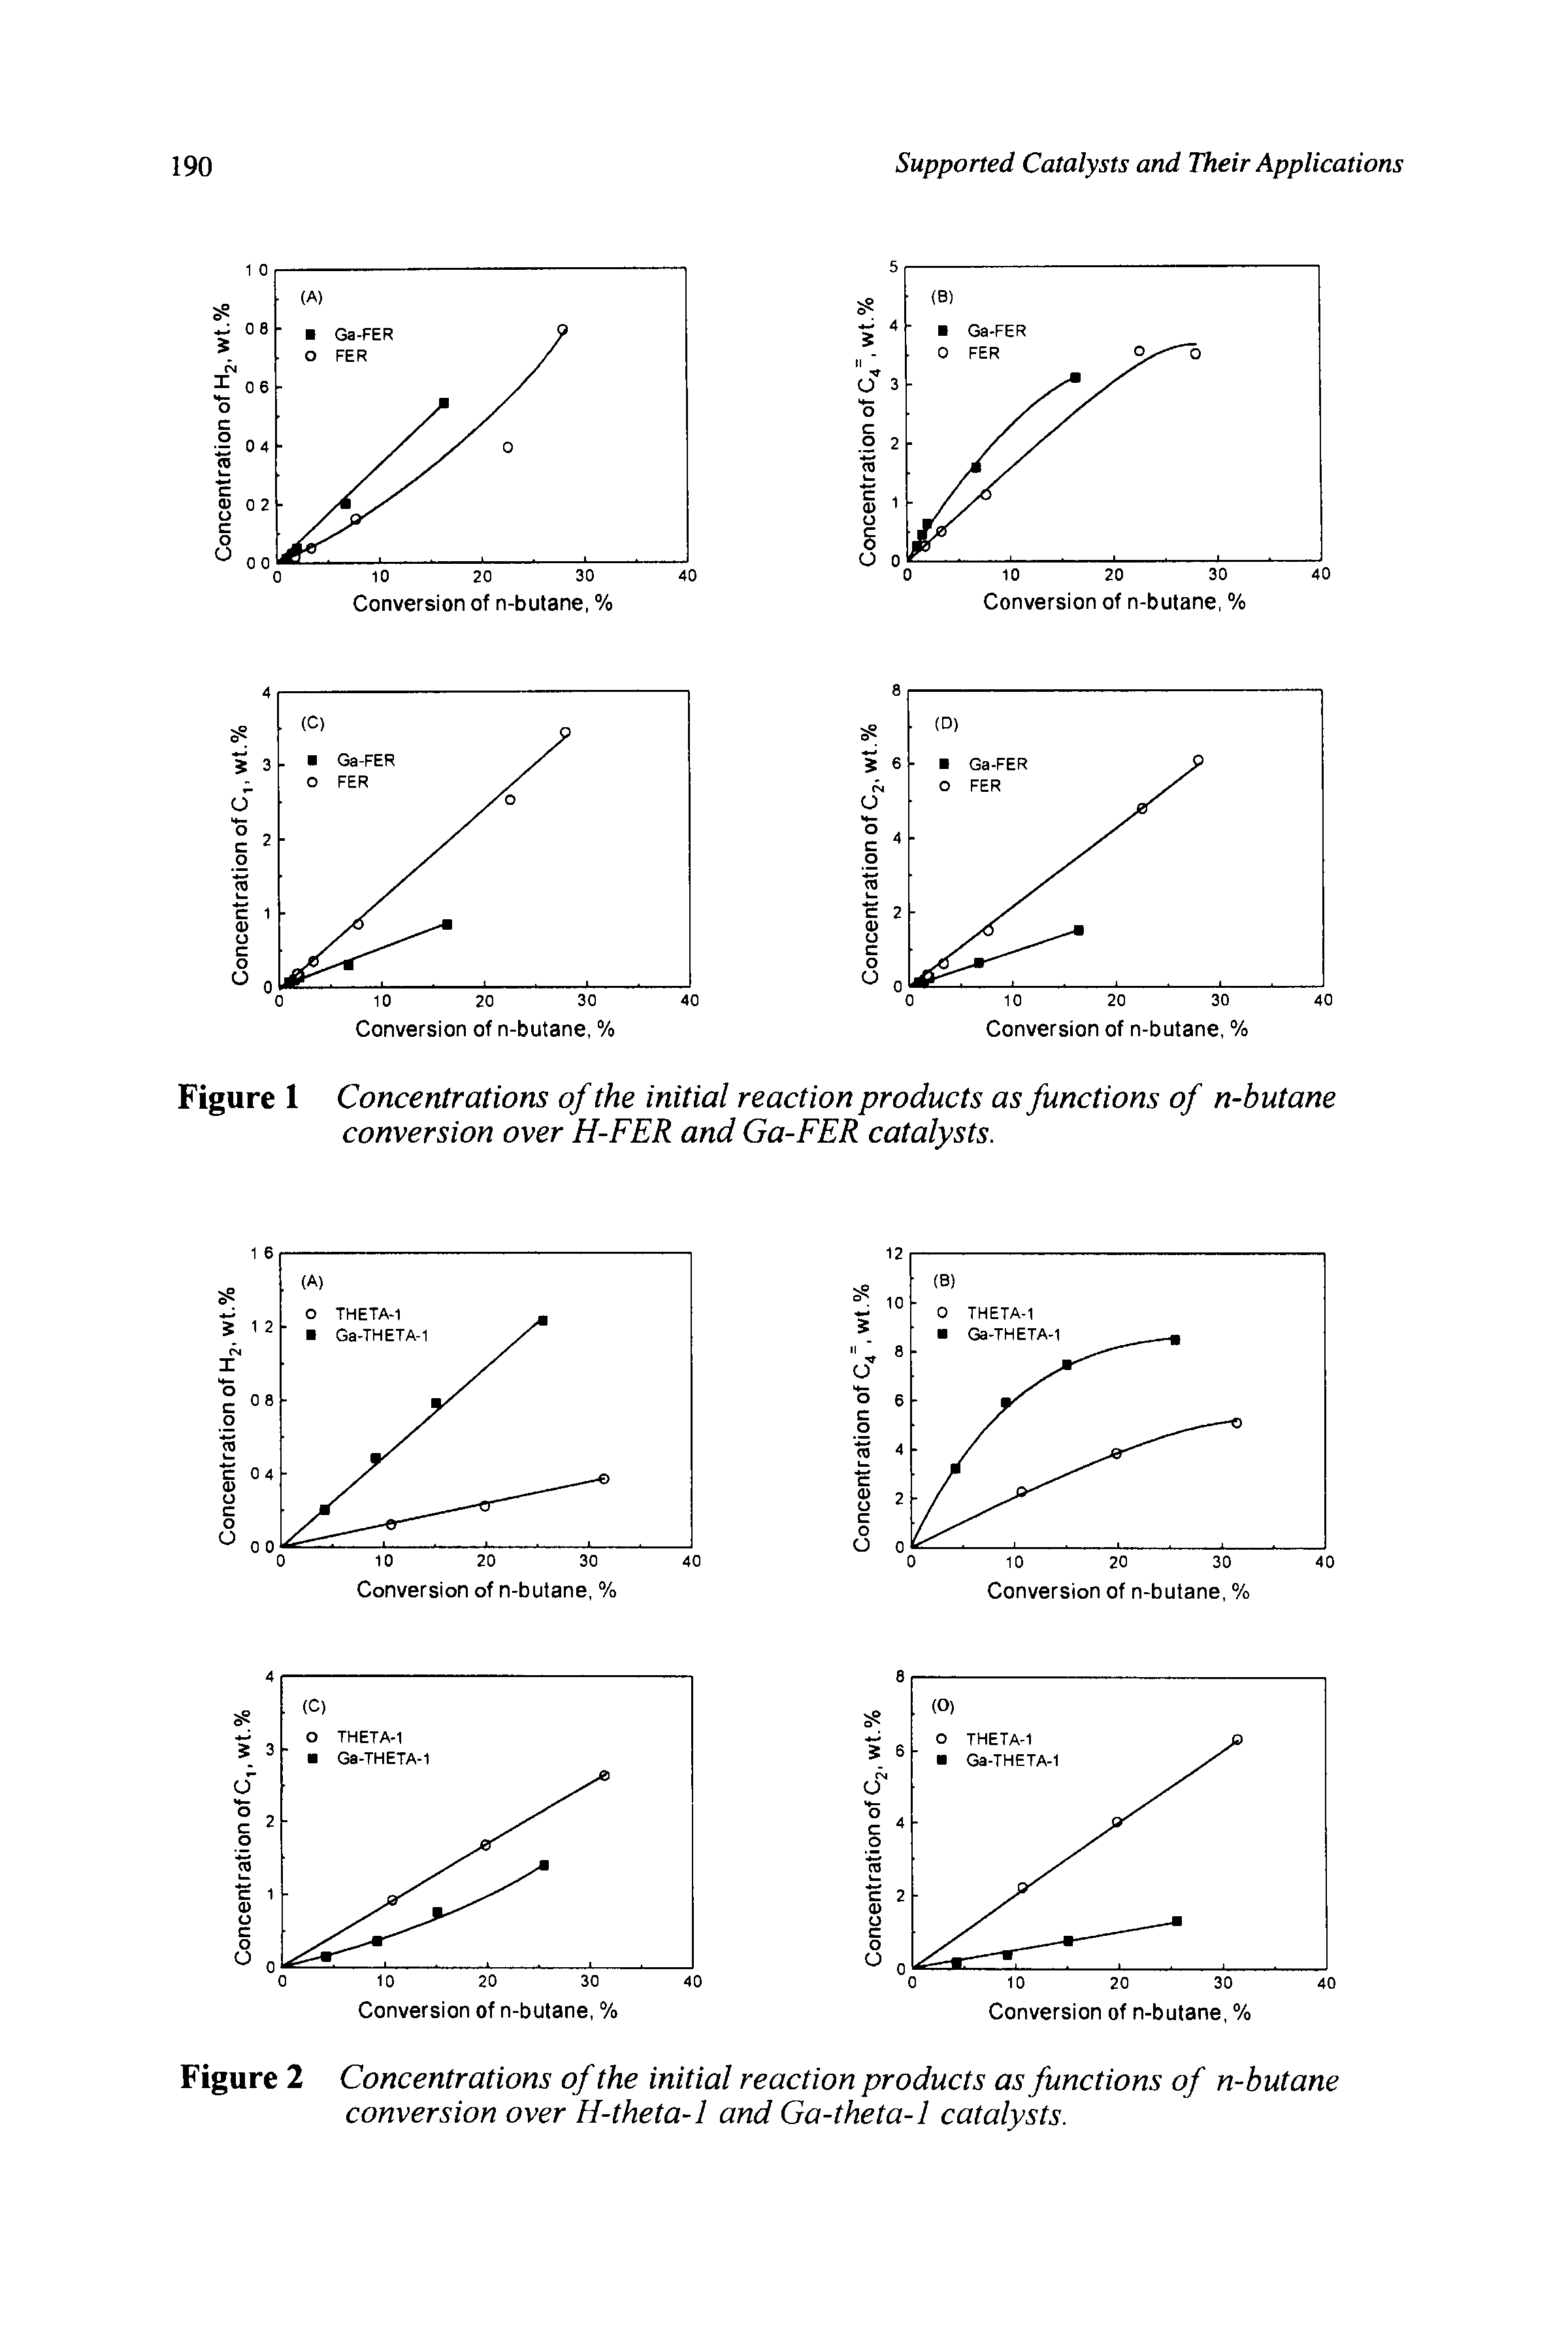 Figure 1 Concentrations of the initial reaction products as functions of n-butane conversion over H-FER and Ga-FER catalysts.